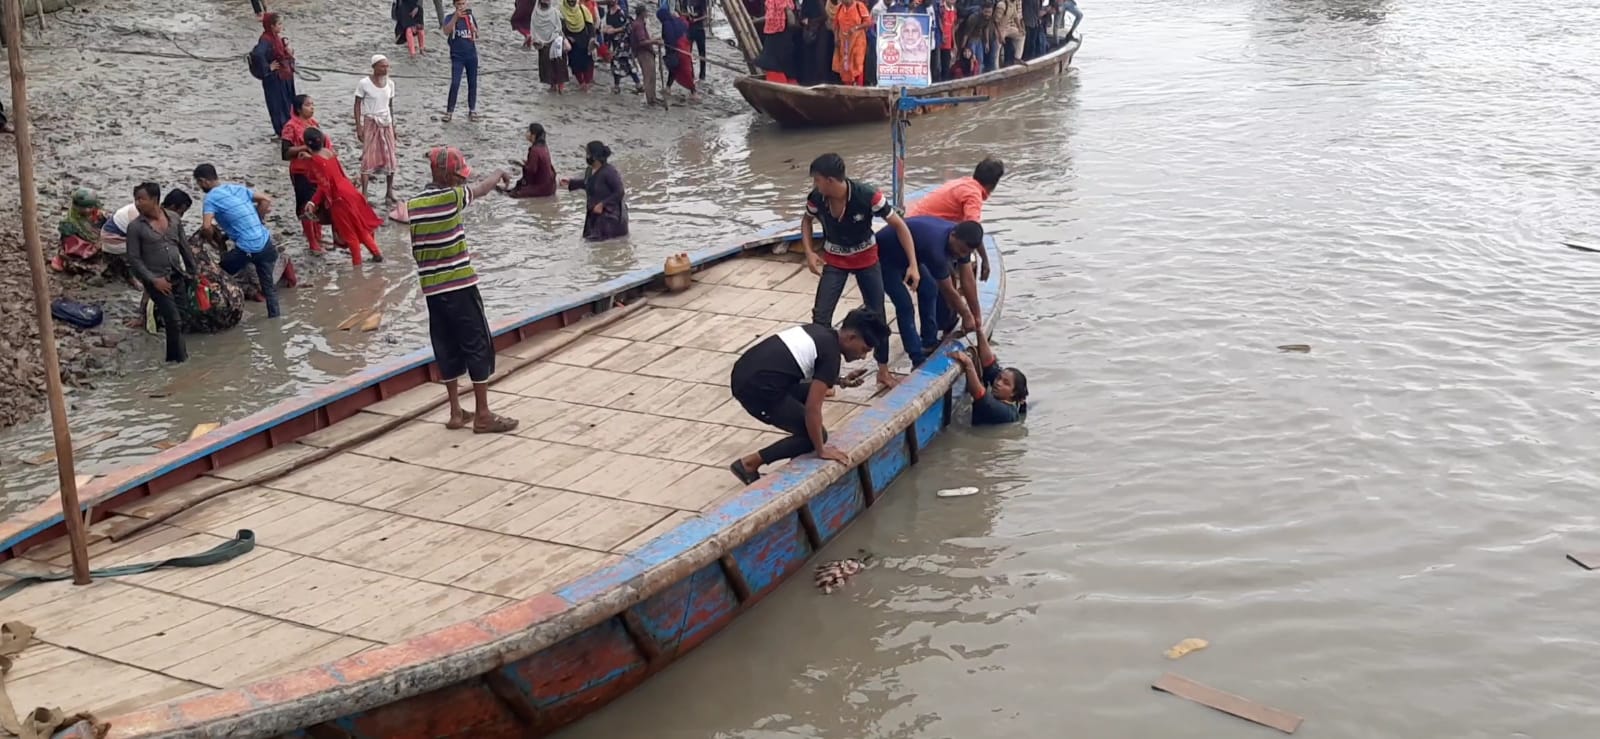 Rescuers search for survivors after overloaded ferry capsizes in Mongla amid Cyclone Remal aftermath. Ohoto: Voice7 News